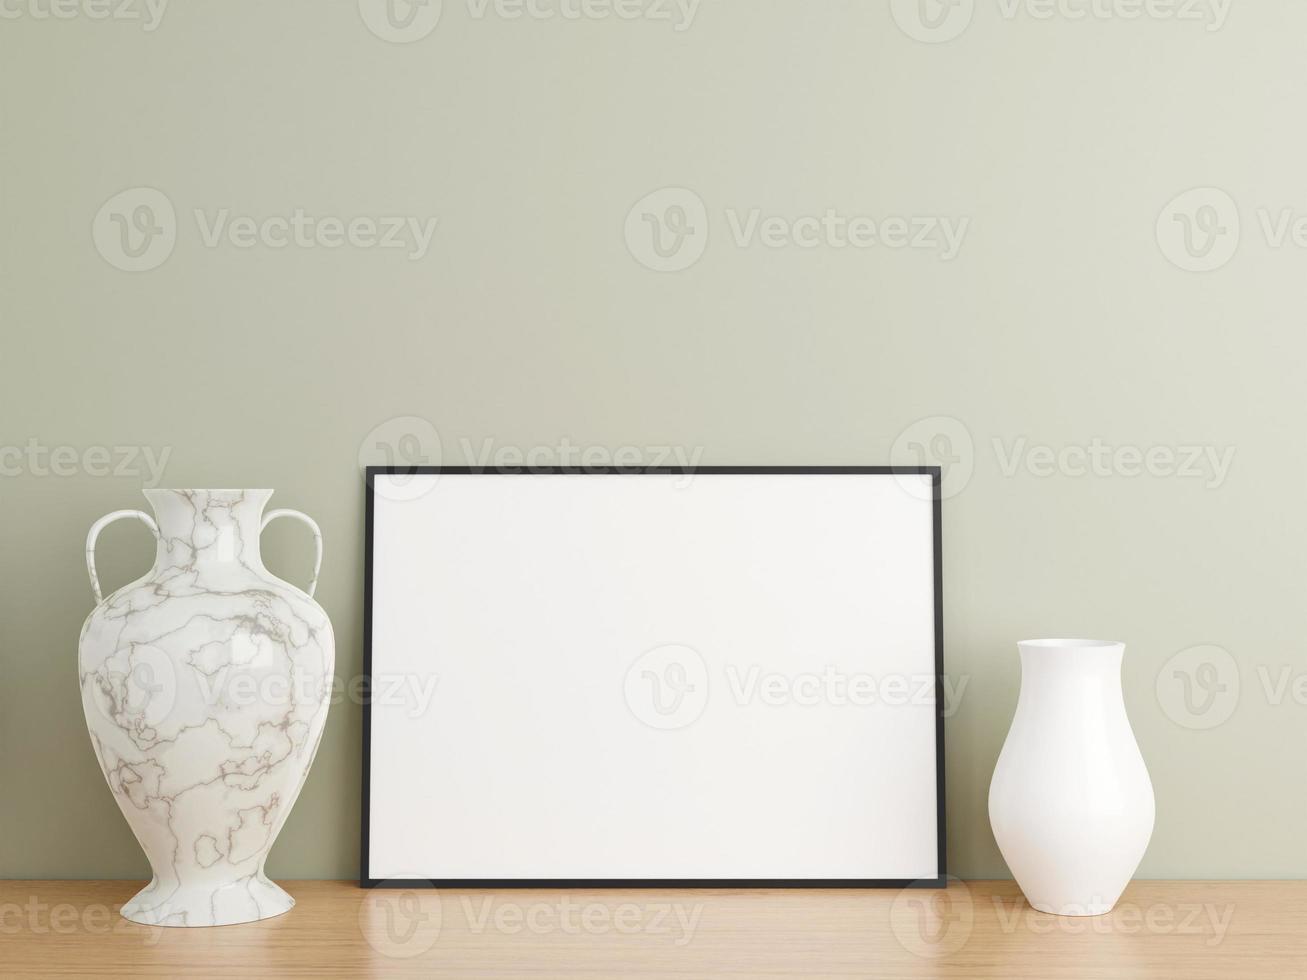 Minimalist horizontal black poster or photo frame mockup on wooden floor leaning against the wall. 3D Rendering.